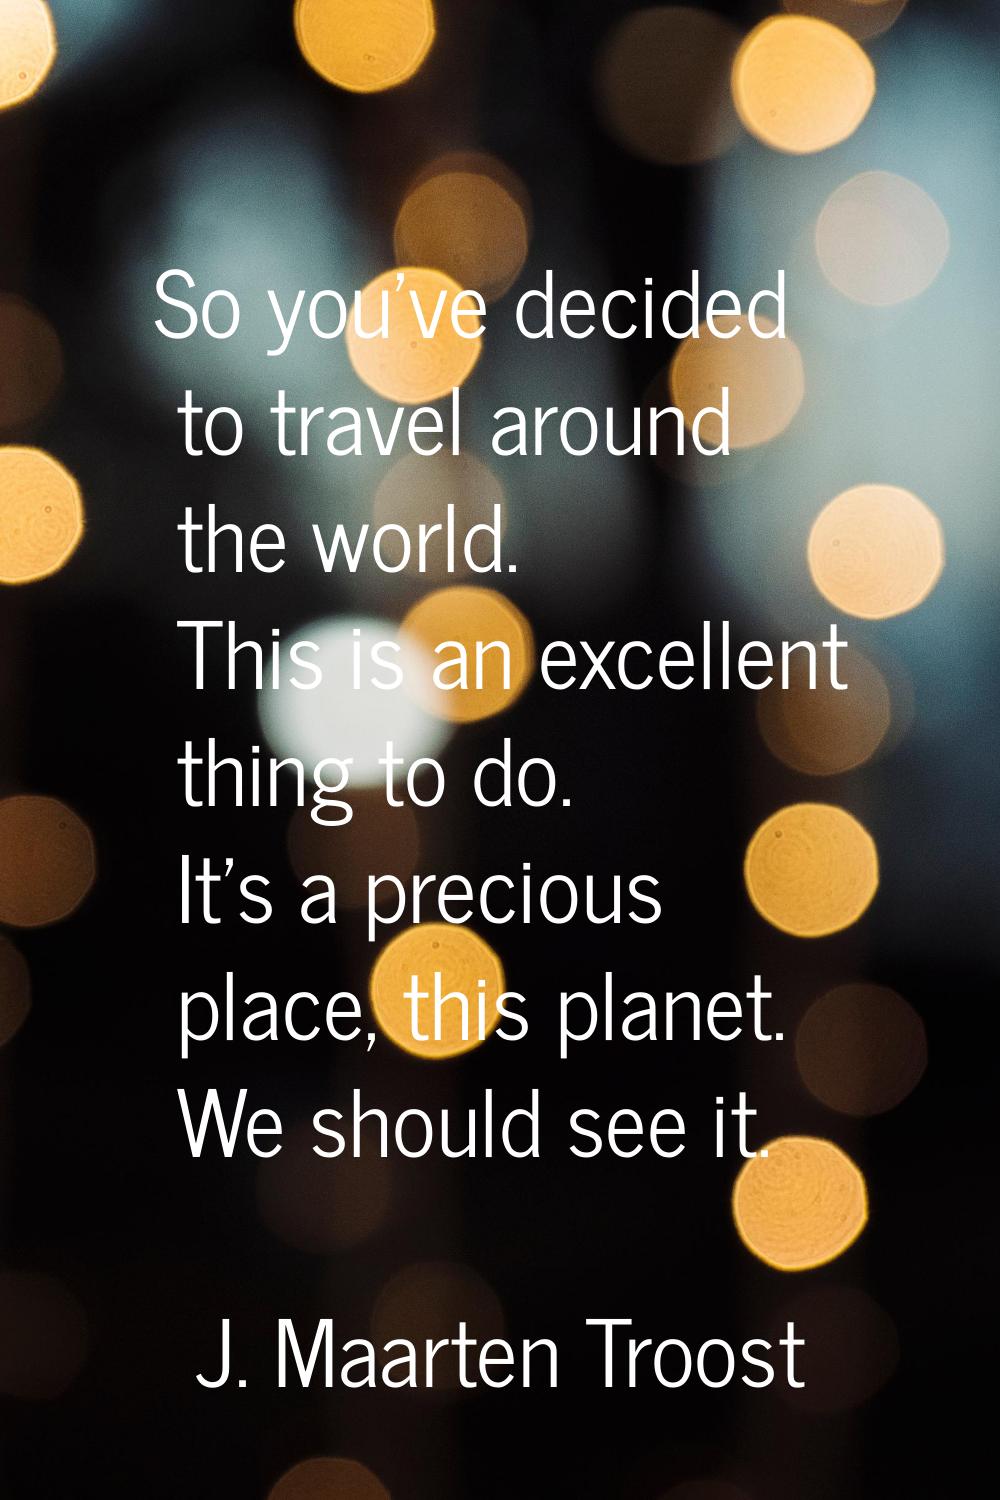 So you've decided to travel around the world. This is an excellent thing to do. It's a precious pla